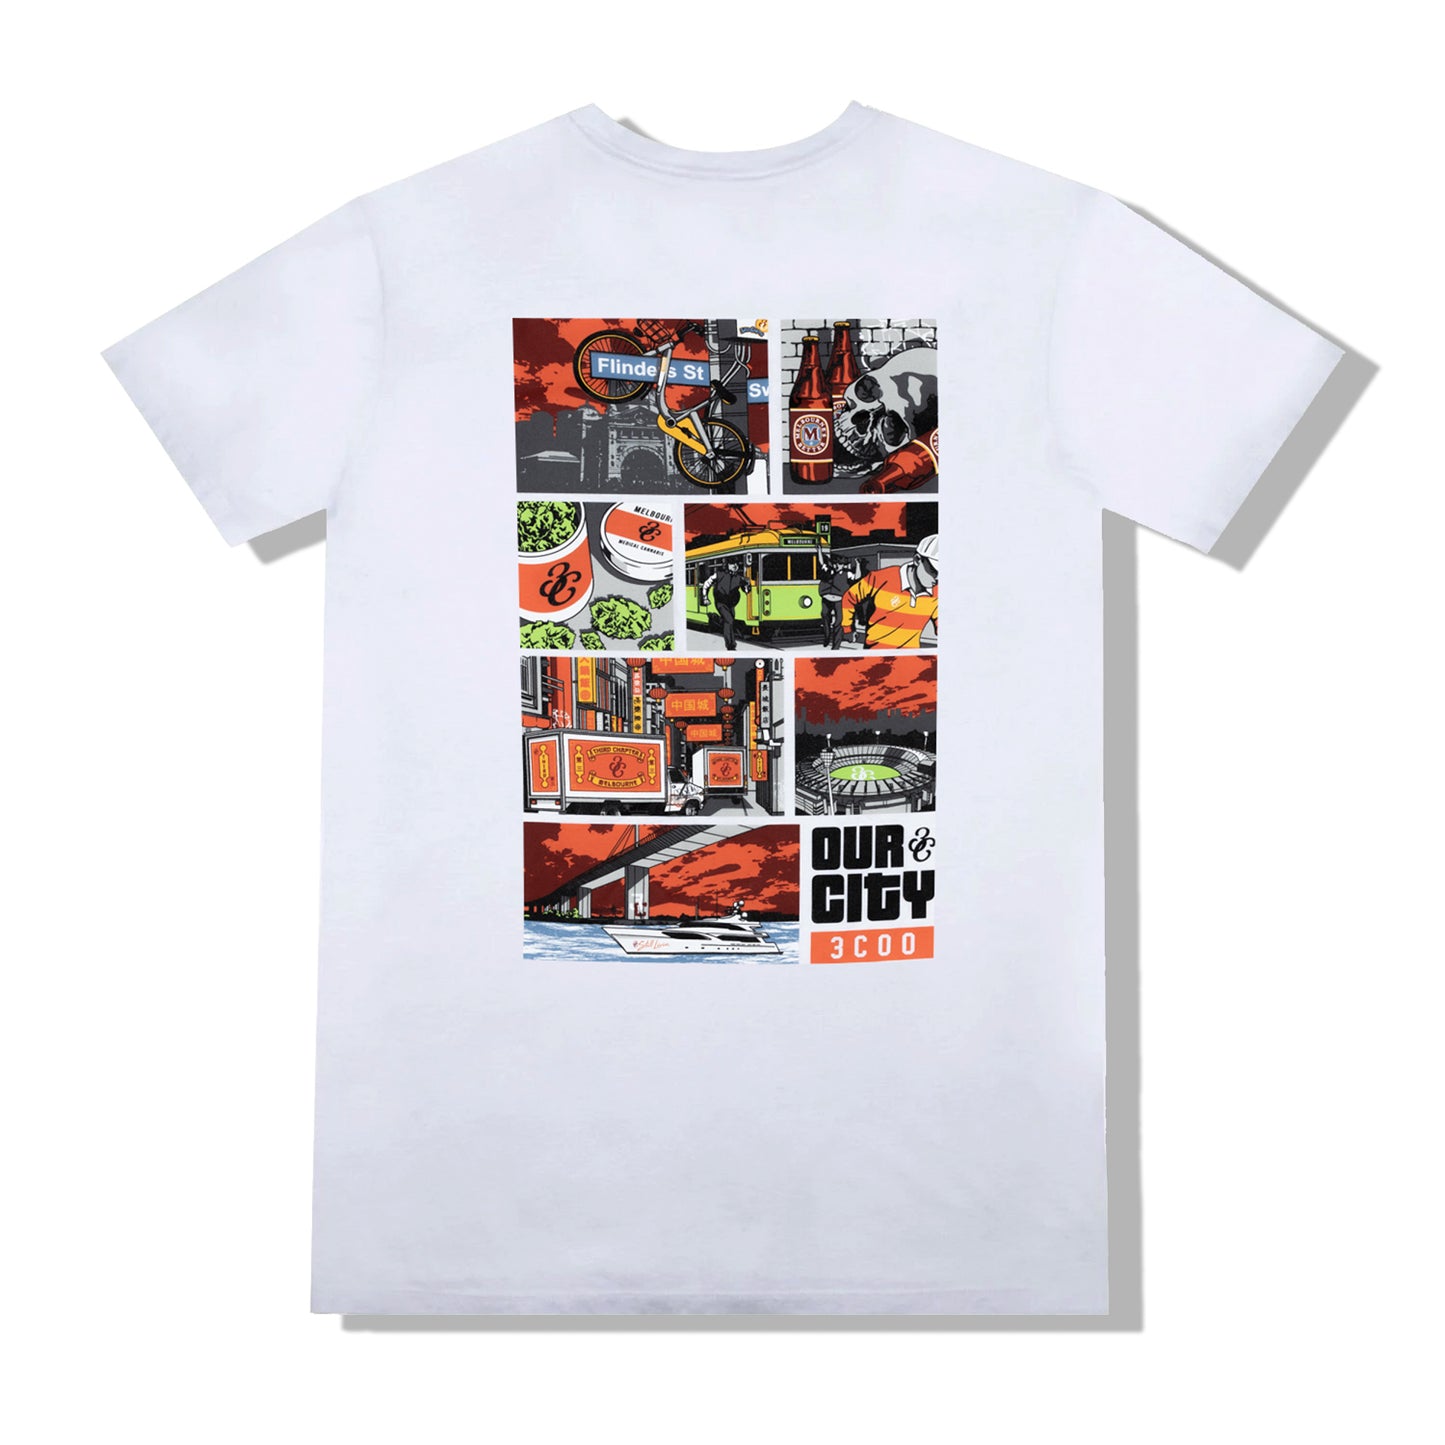 OUR CITY T-Shirt White